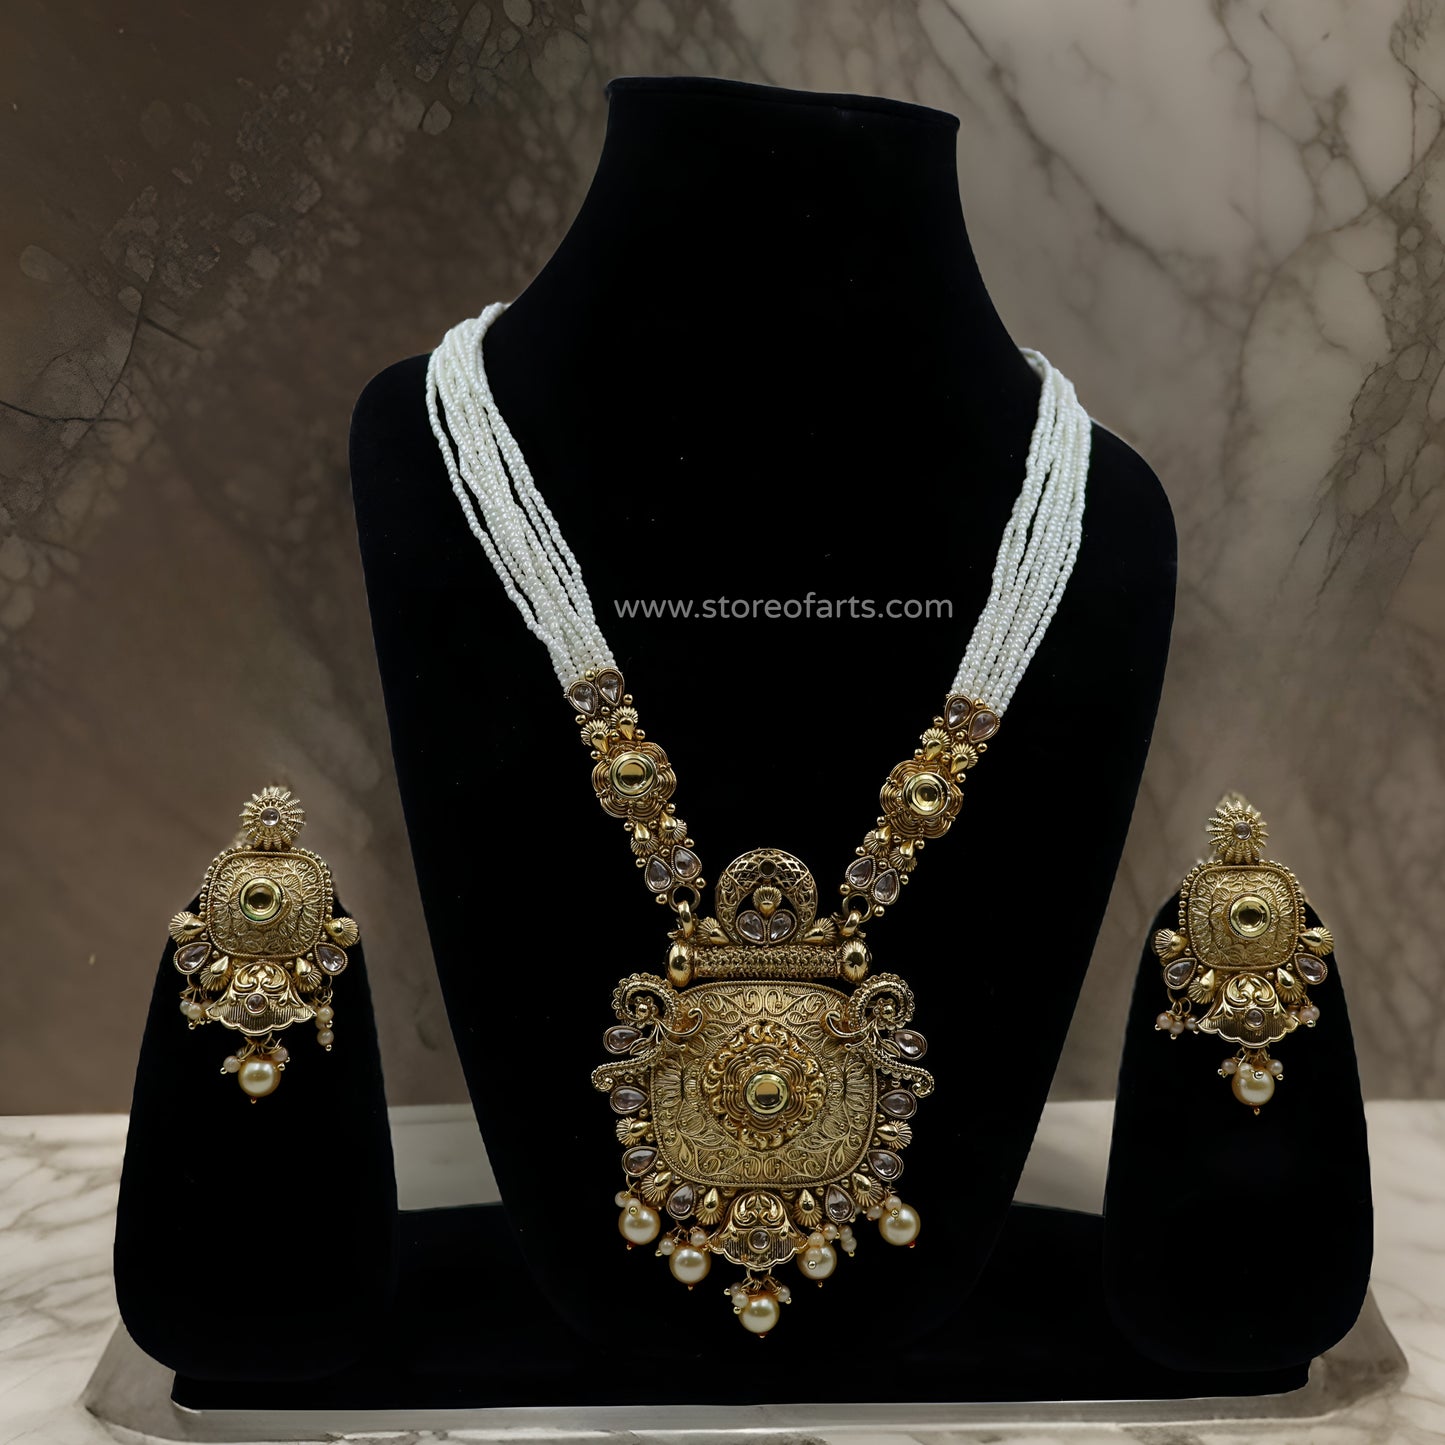 Exquisite Temple Jewelry Necklace Set: Timeless Elegance for Women